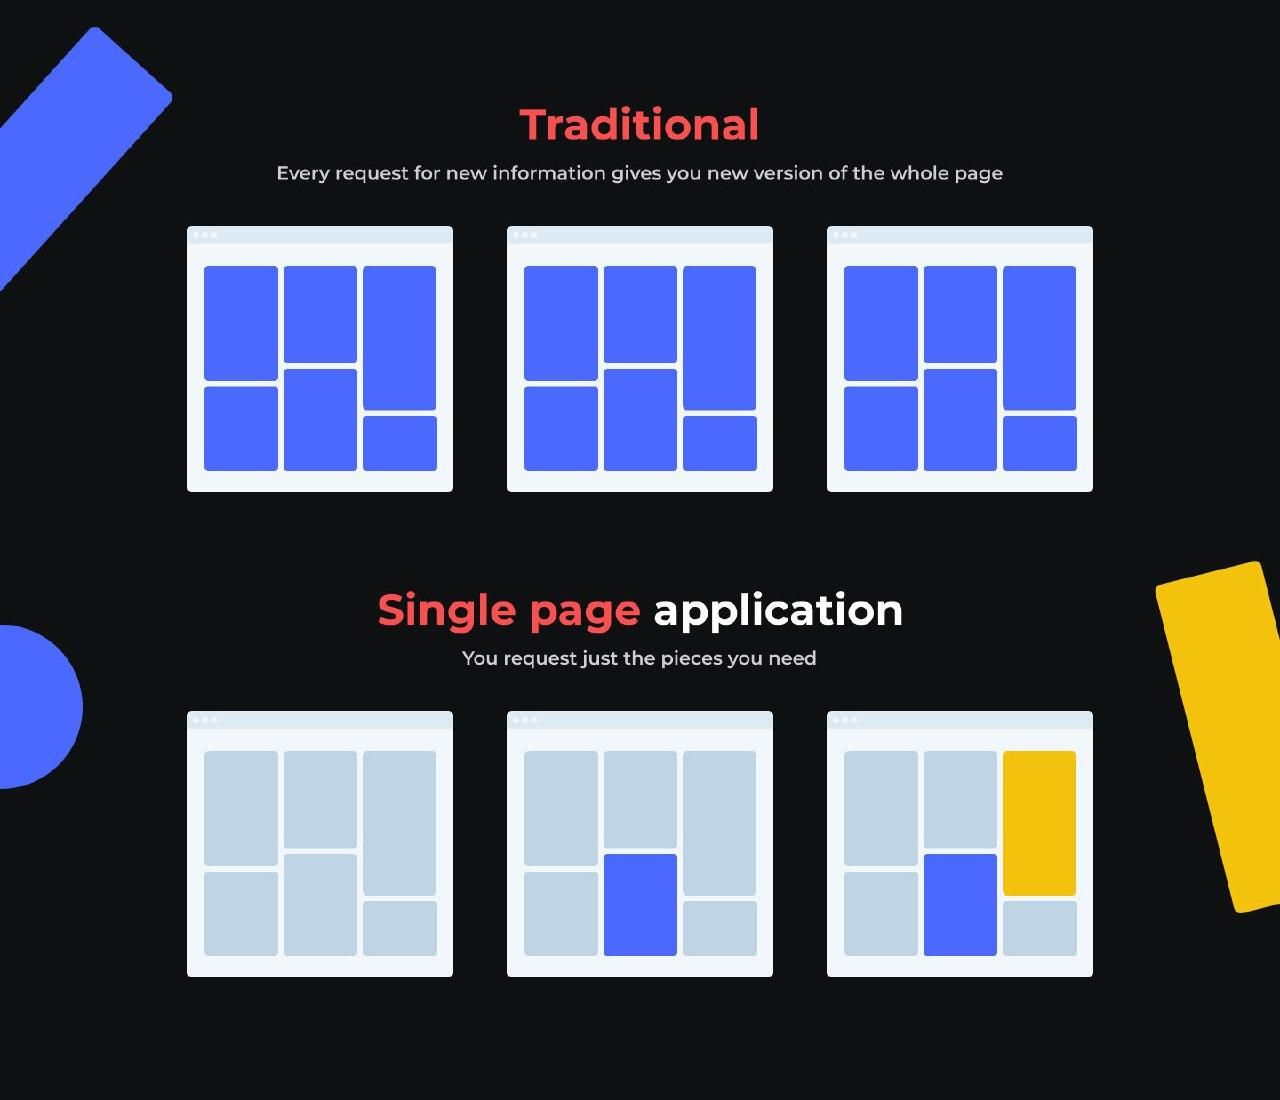 Advantages of single-page applications